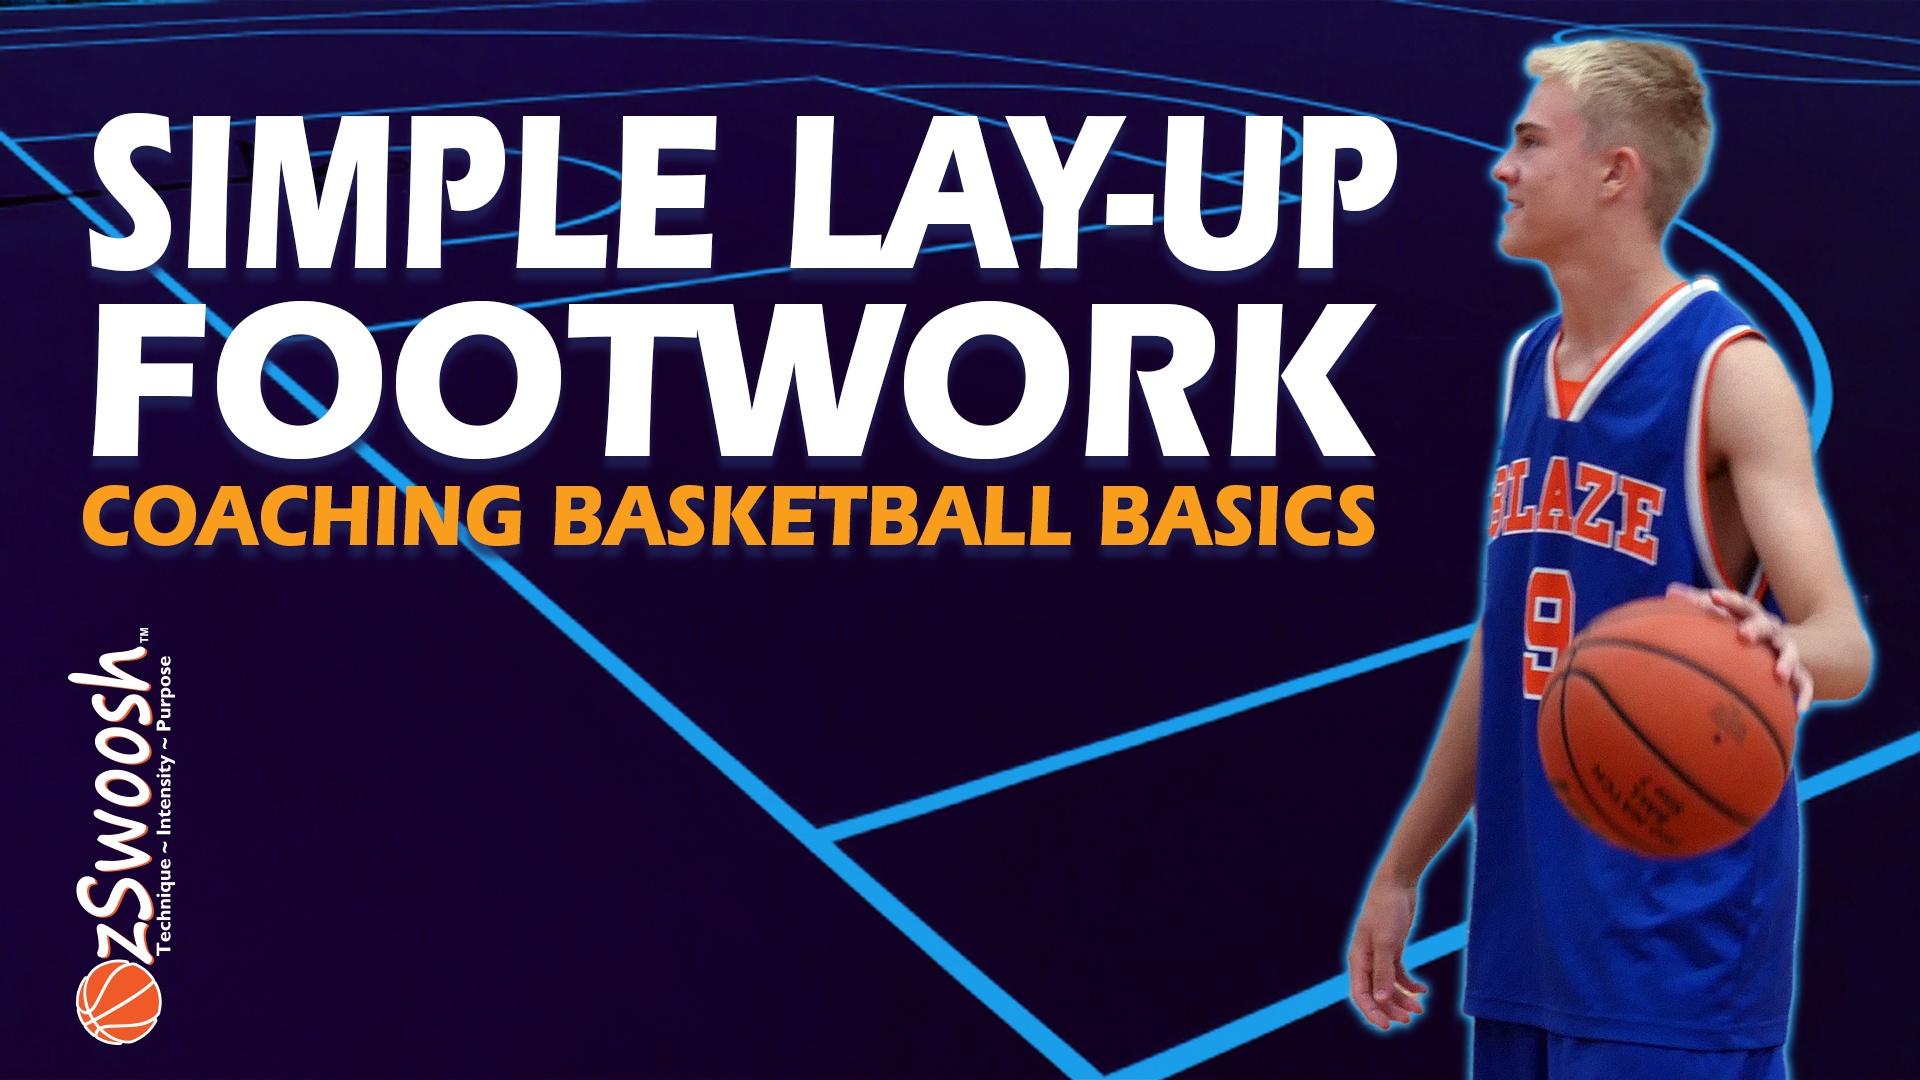 How To Do A Layup In Basketball